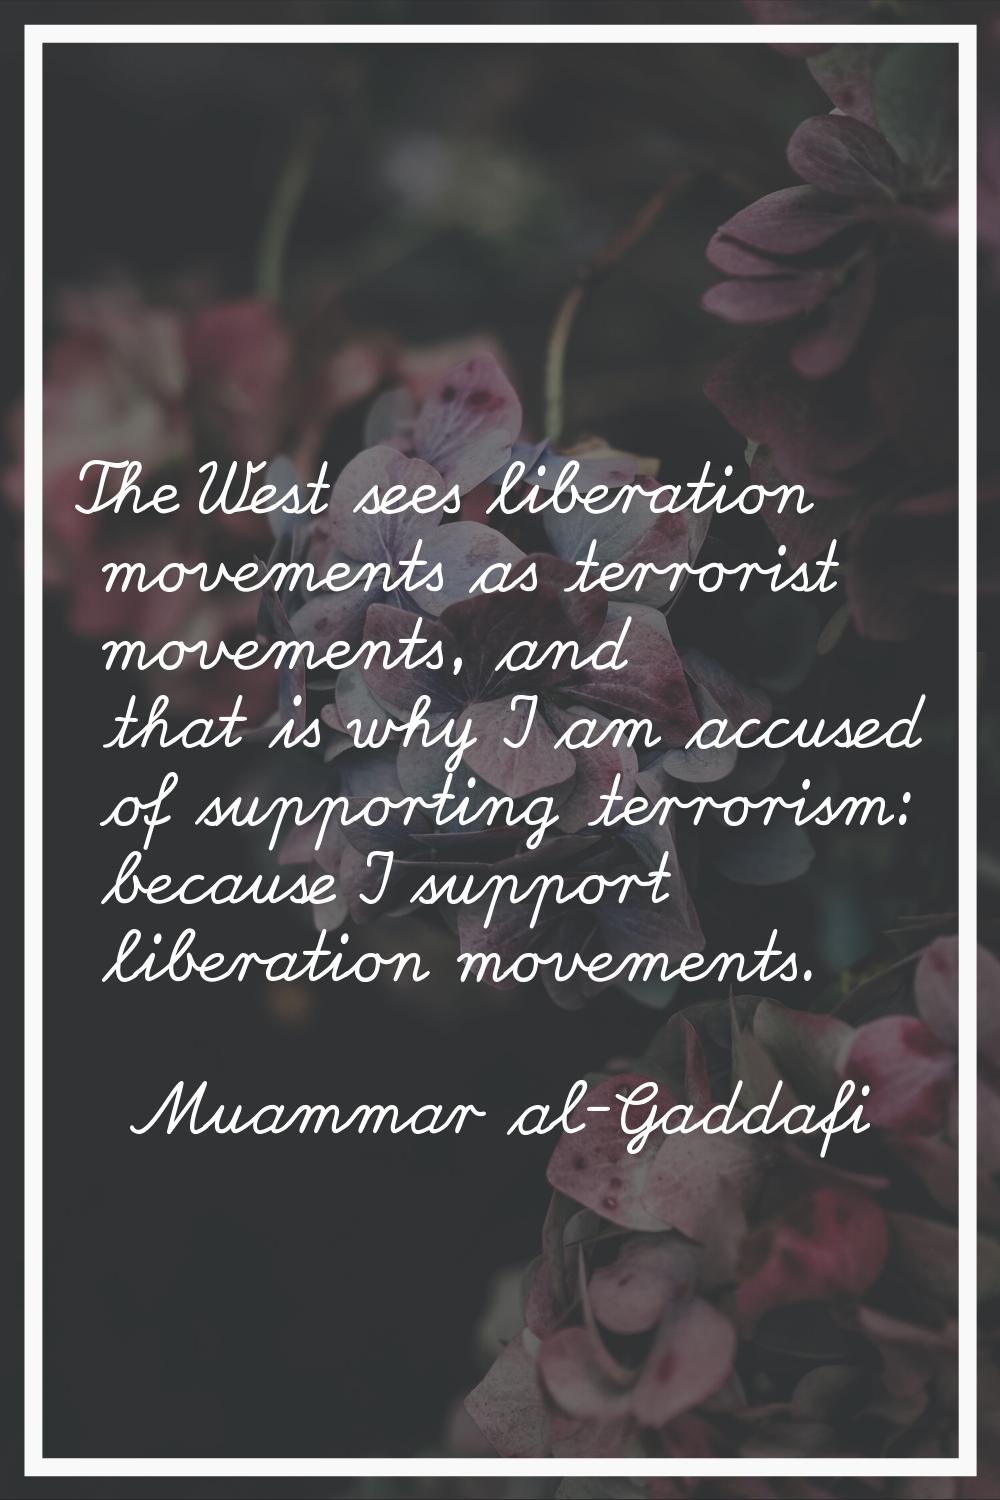 The West sees liberation movements as terrorist movements, and that is why I am accused of supporti